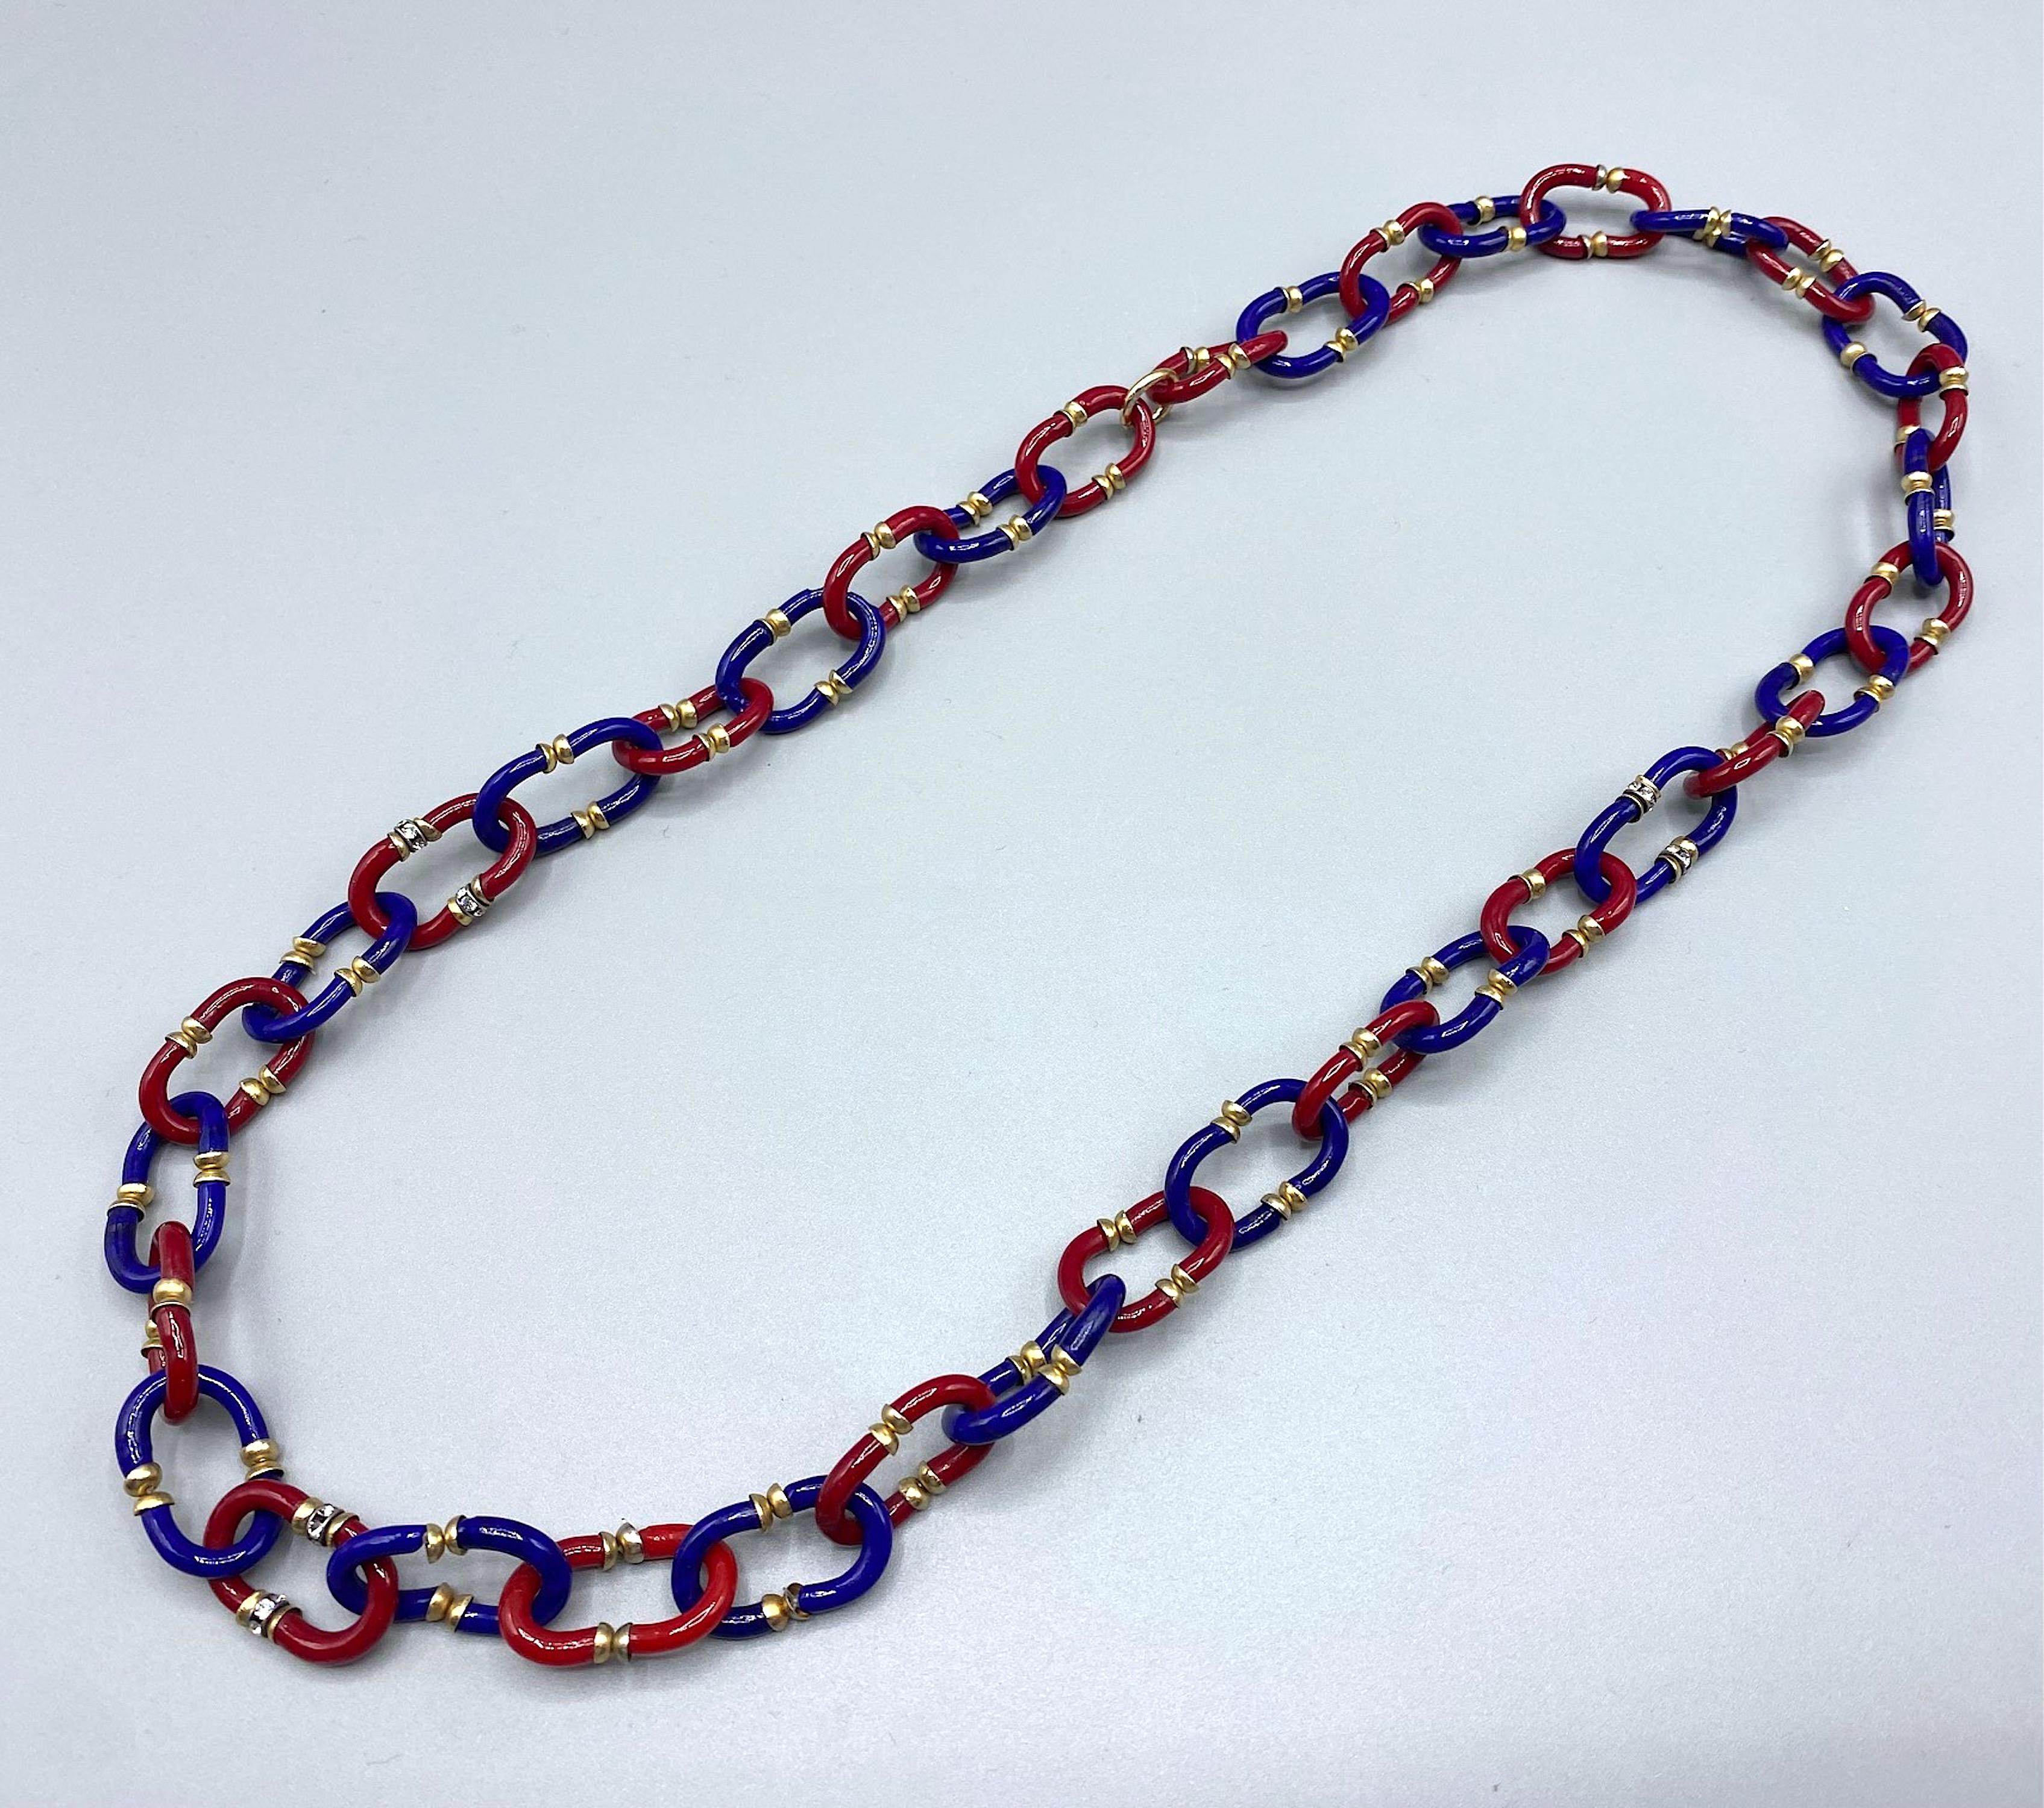 Lovely glass chain necklace by Archimede Seguso of Italy. Chain links are hand formed of two C shape glass pieces. The necklace is 30 inches long and .75 of an inch wide.
The Necklace can not be open but fit around the head.
